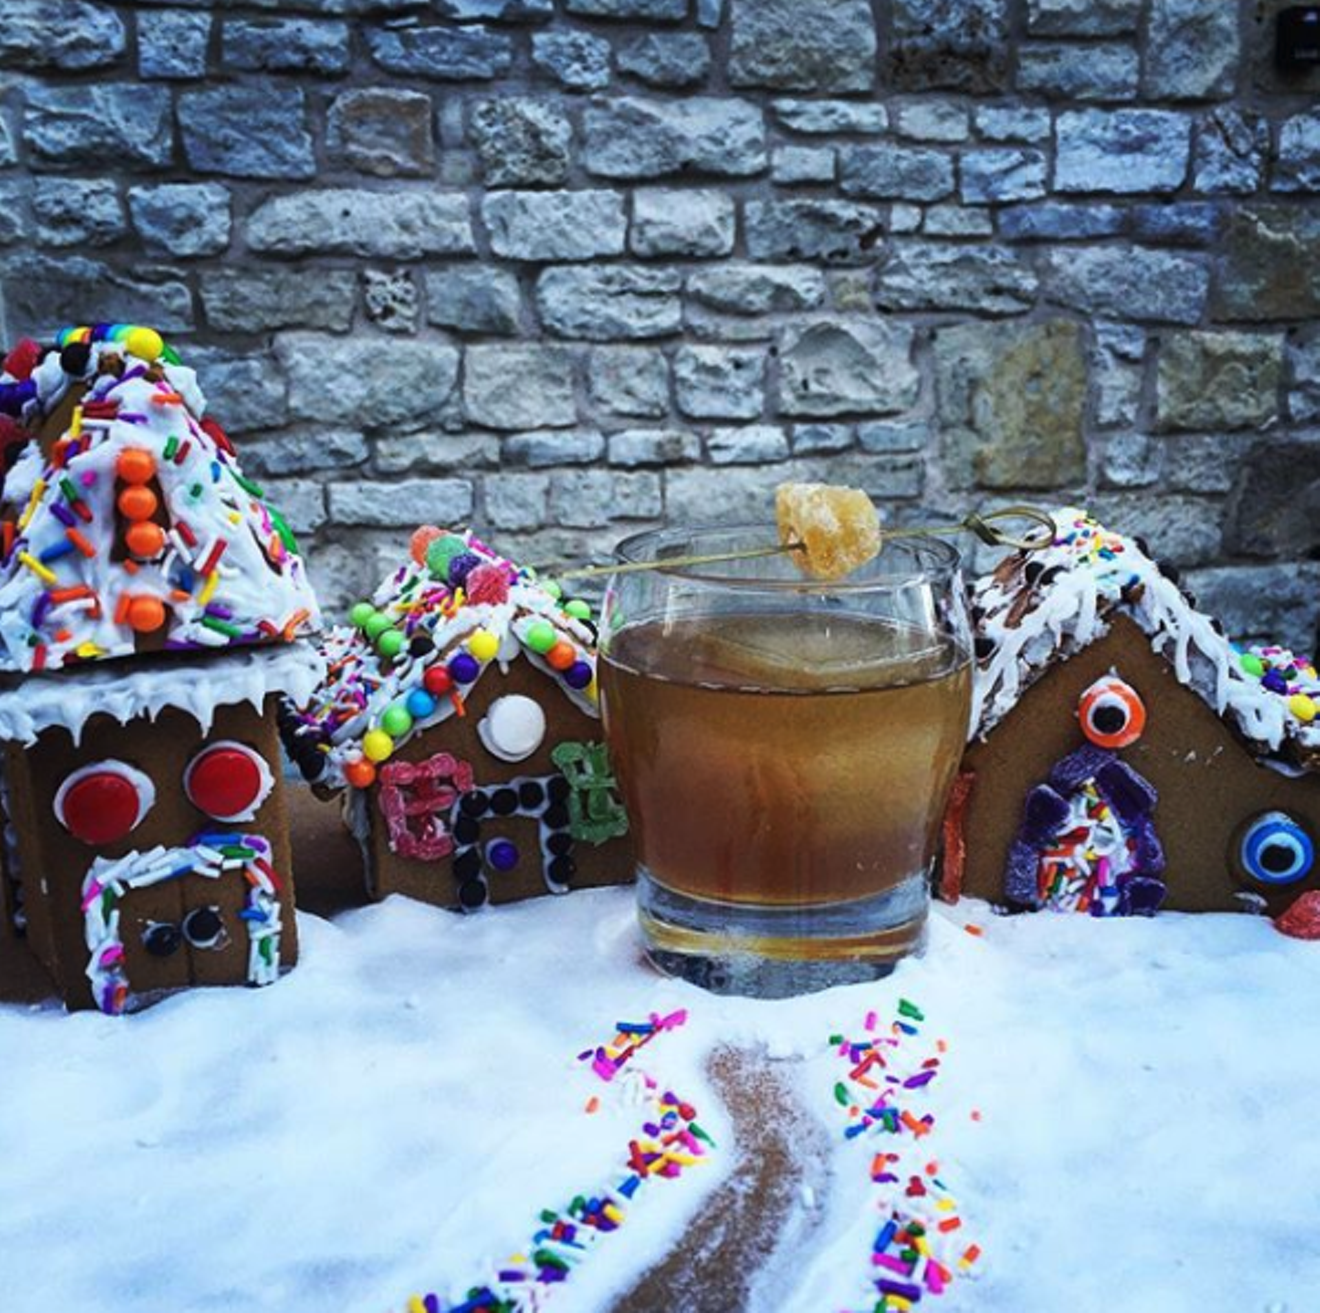 Say "Gingerbread Man" three times and a cocktail will show up in front of you.